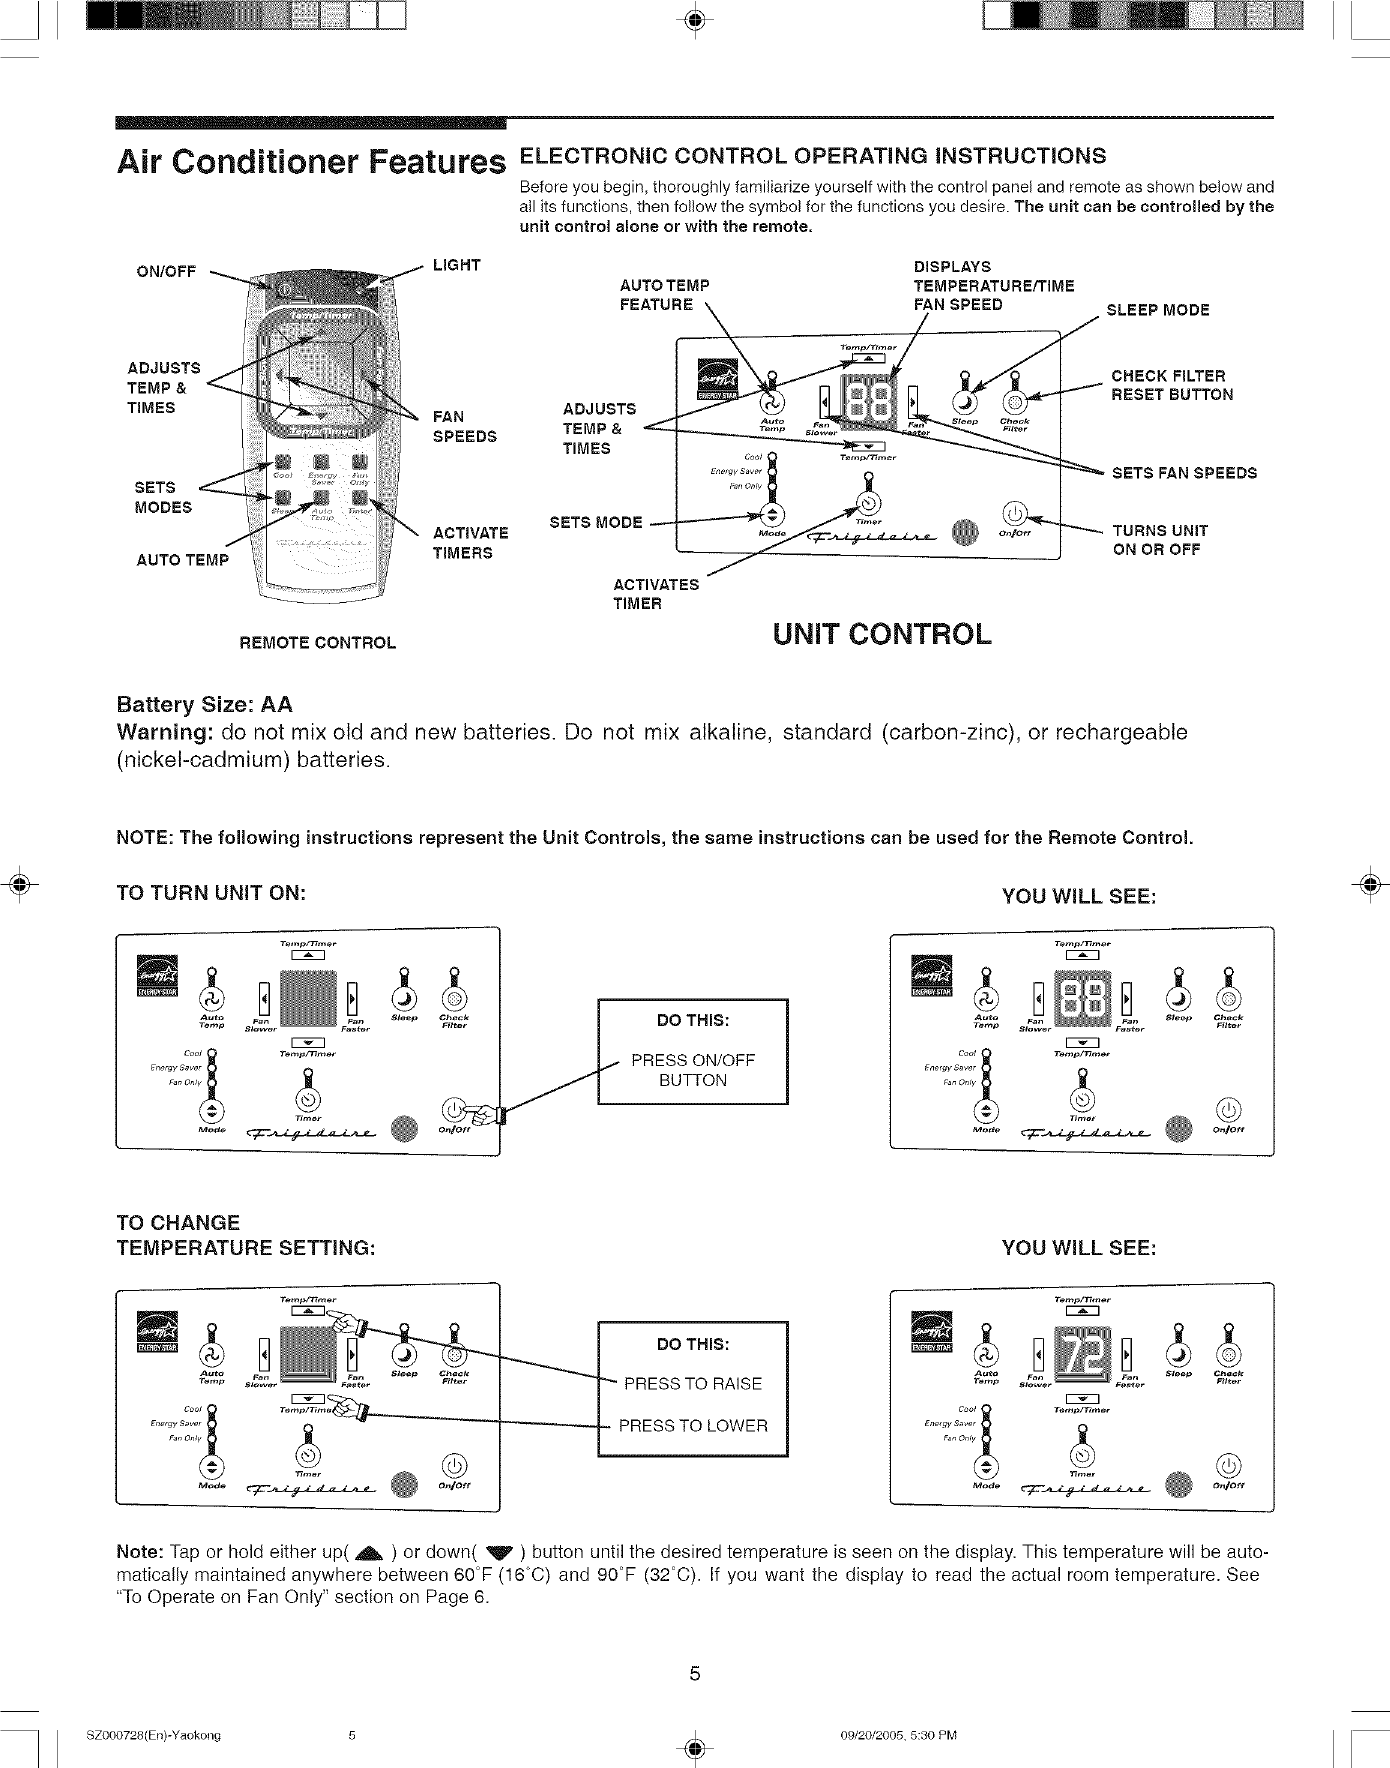 Page 5 of 11 - Frigidaire FAM157Q1A1 User Manual  A/C - Manuals And Guides L0604043